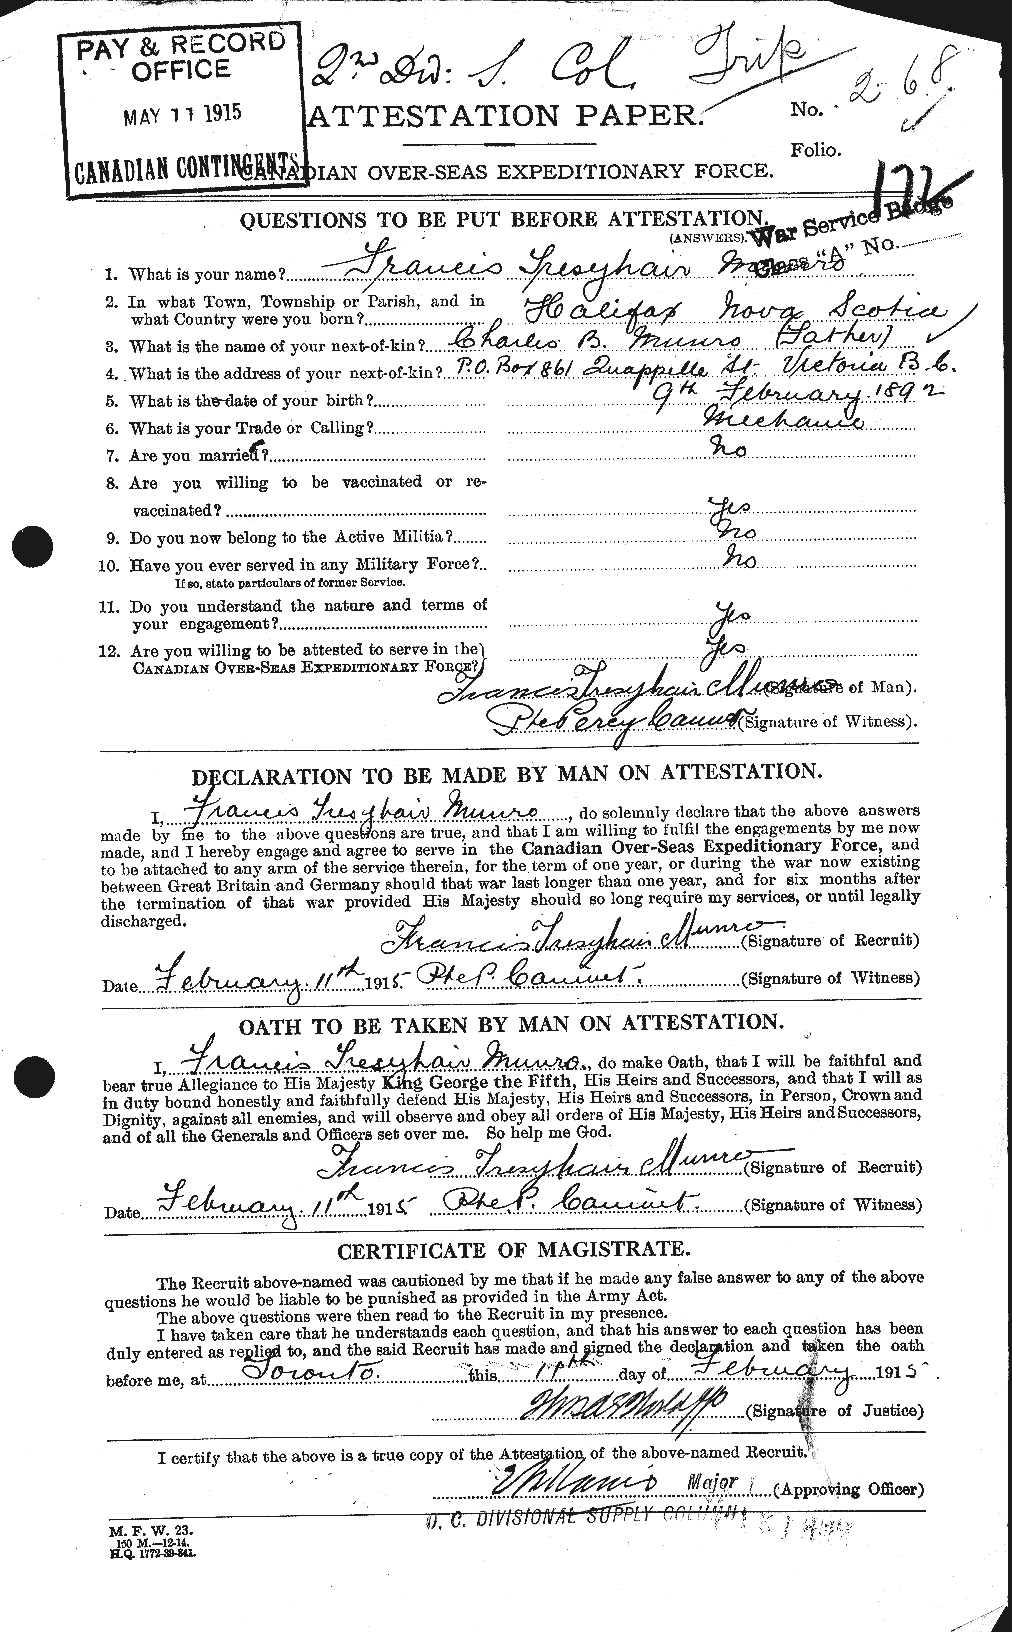 Personnel Records of the First World War - CEF 513825a